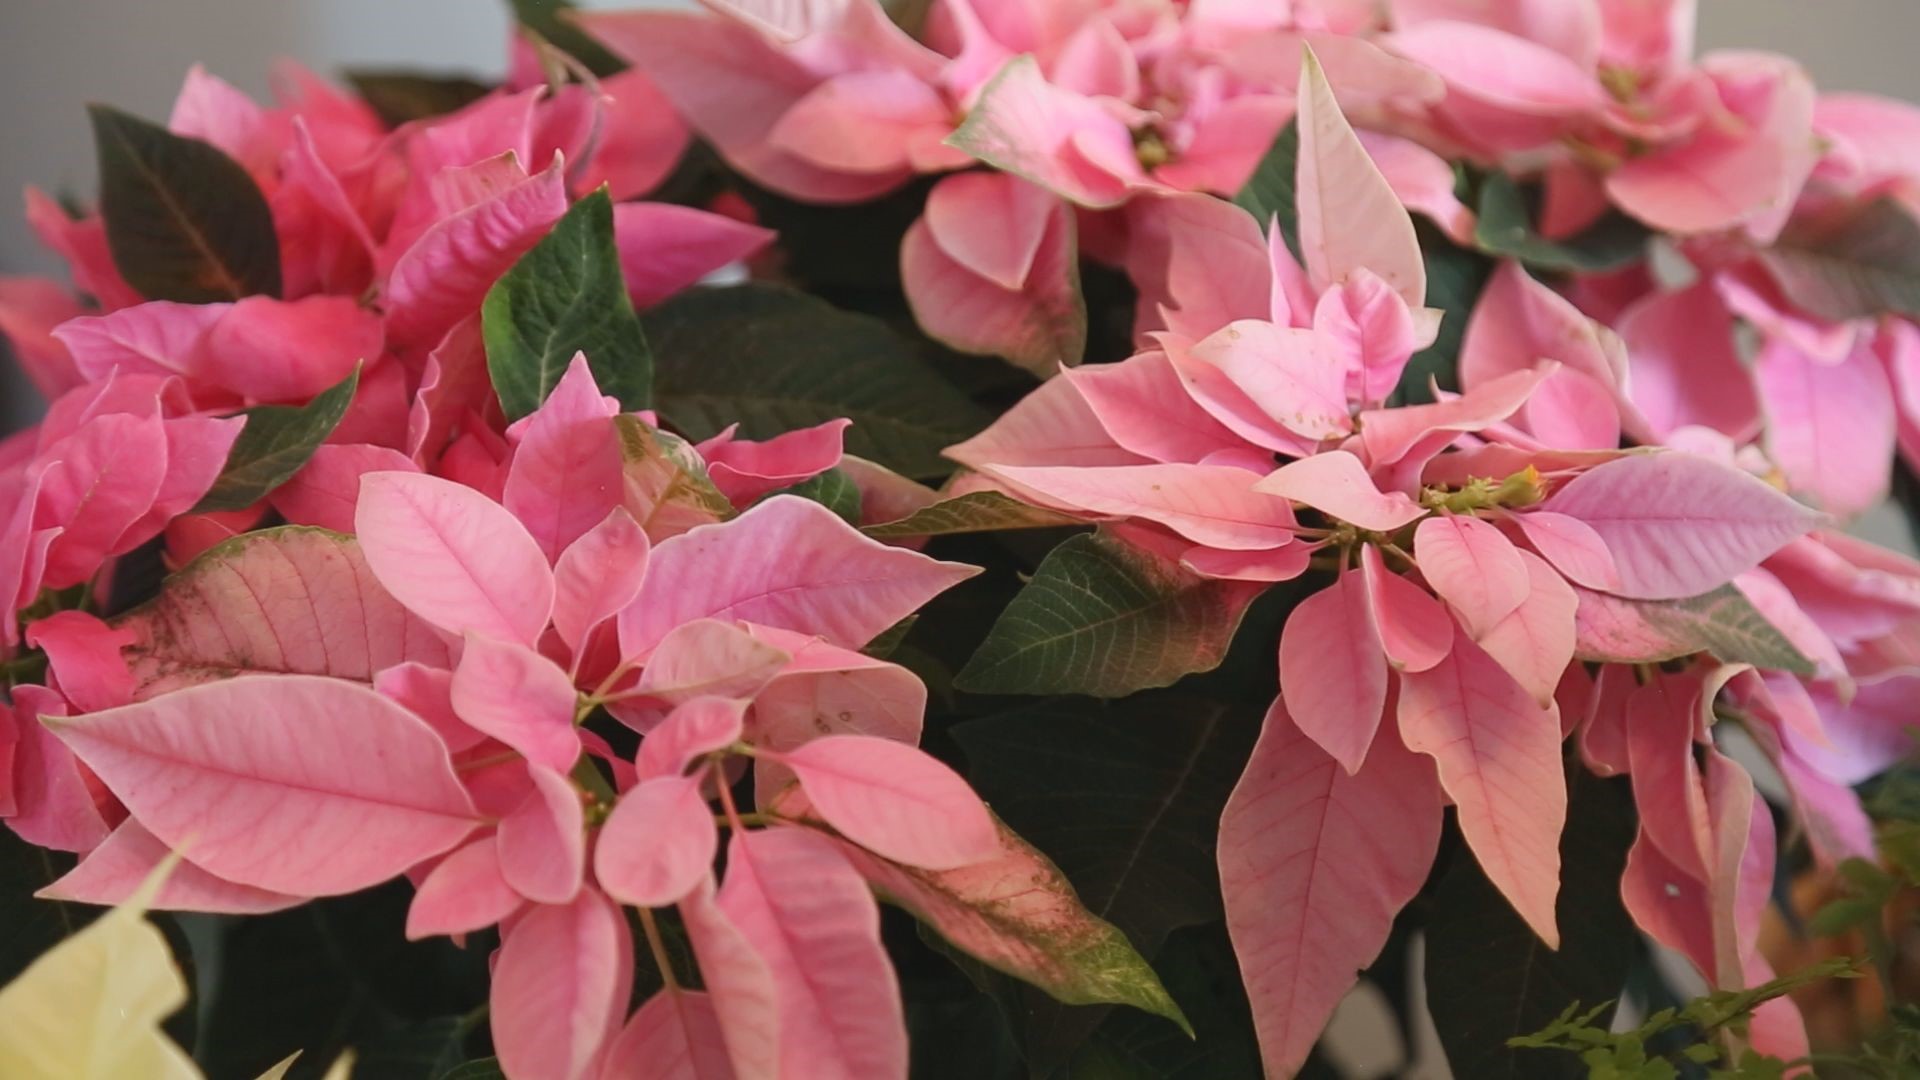 Poinsettias are a wonderful addition to holiday décor. Here are some tips and tricks on how to care for them.